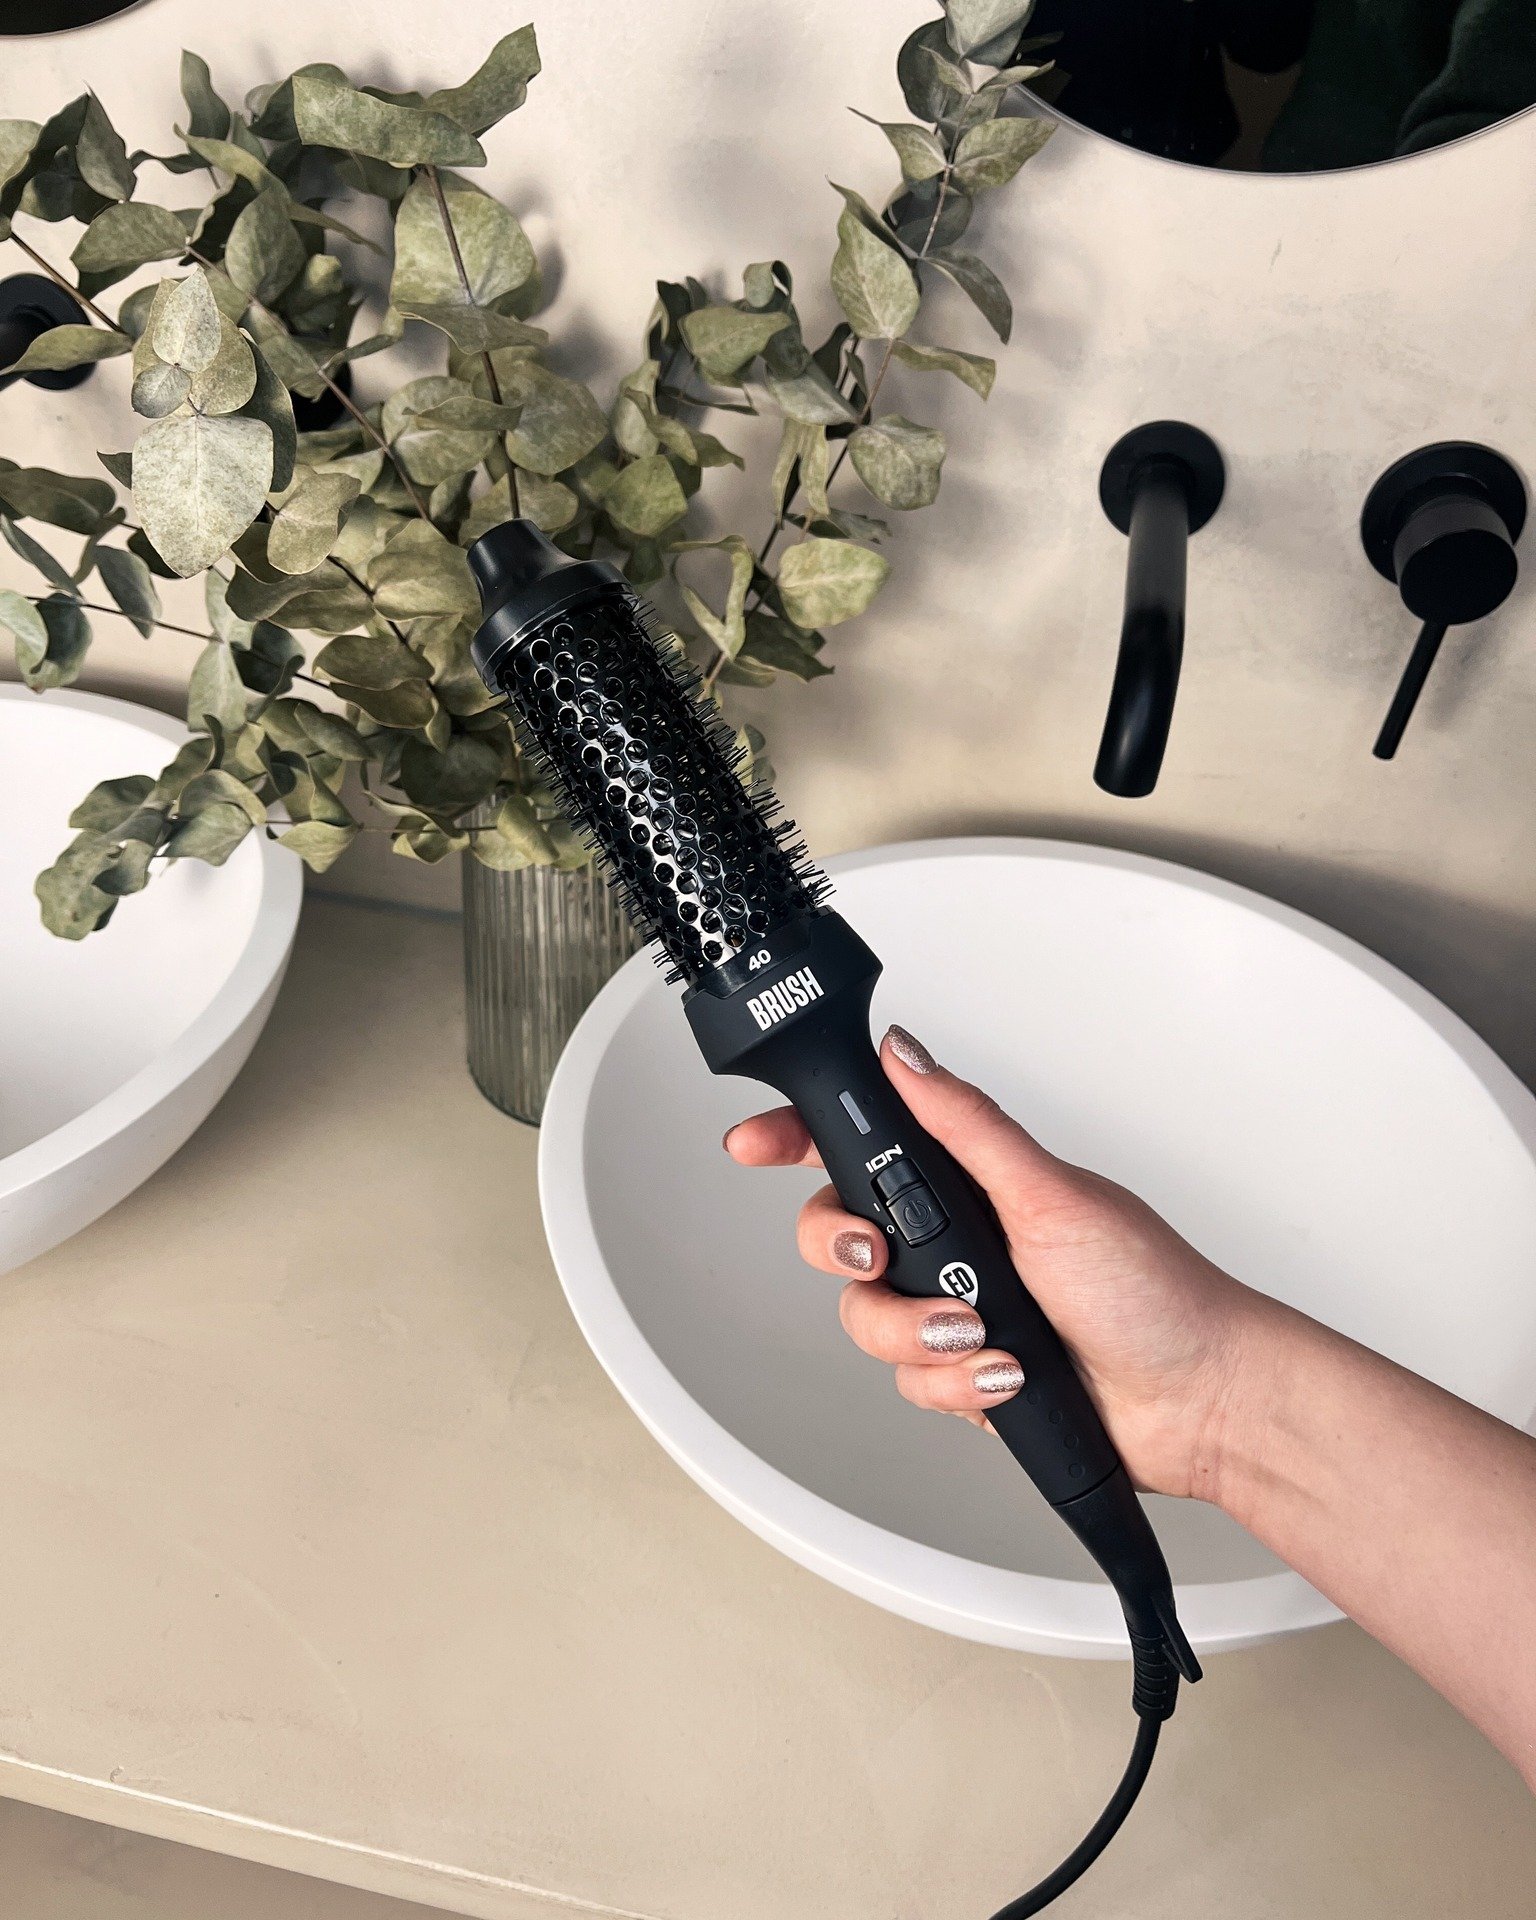 Meet our bestseller: the BRUSH! 🌟 Tell us what you love most about this tool! 🙌🏽

#evrydayhair #hotbrush